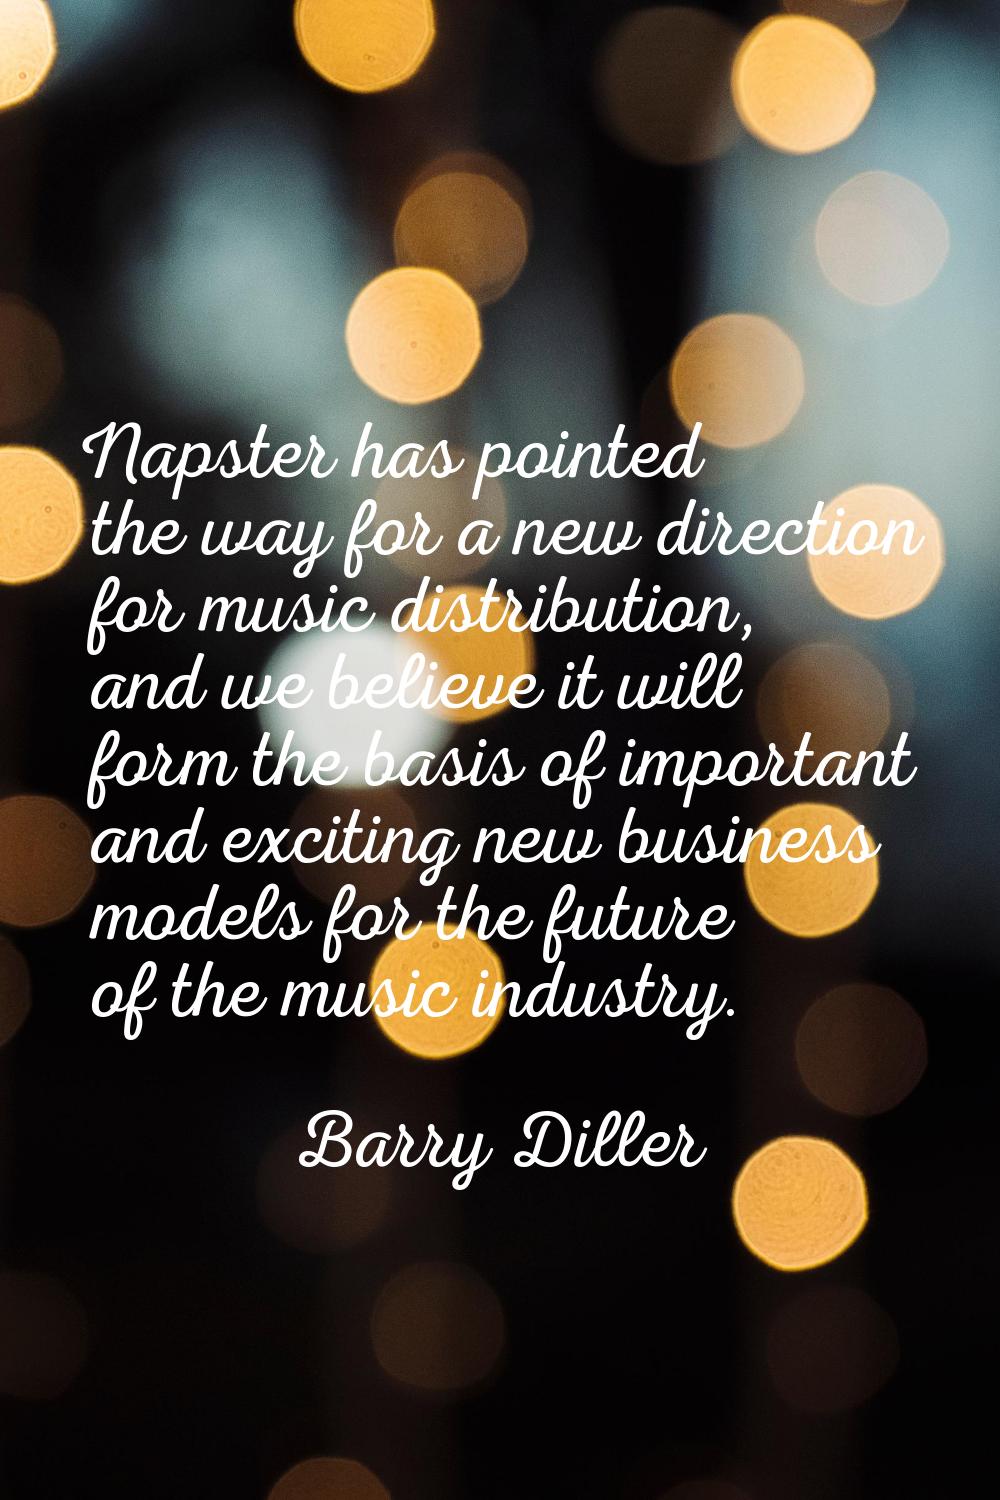 Napster has pointed the way for a new direction for music distribution, and we believe it will form